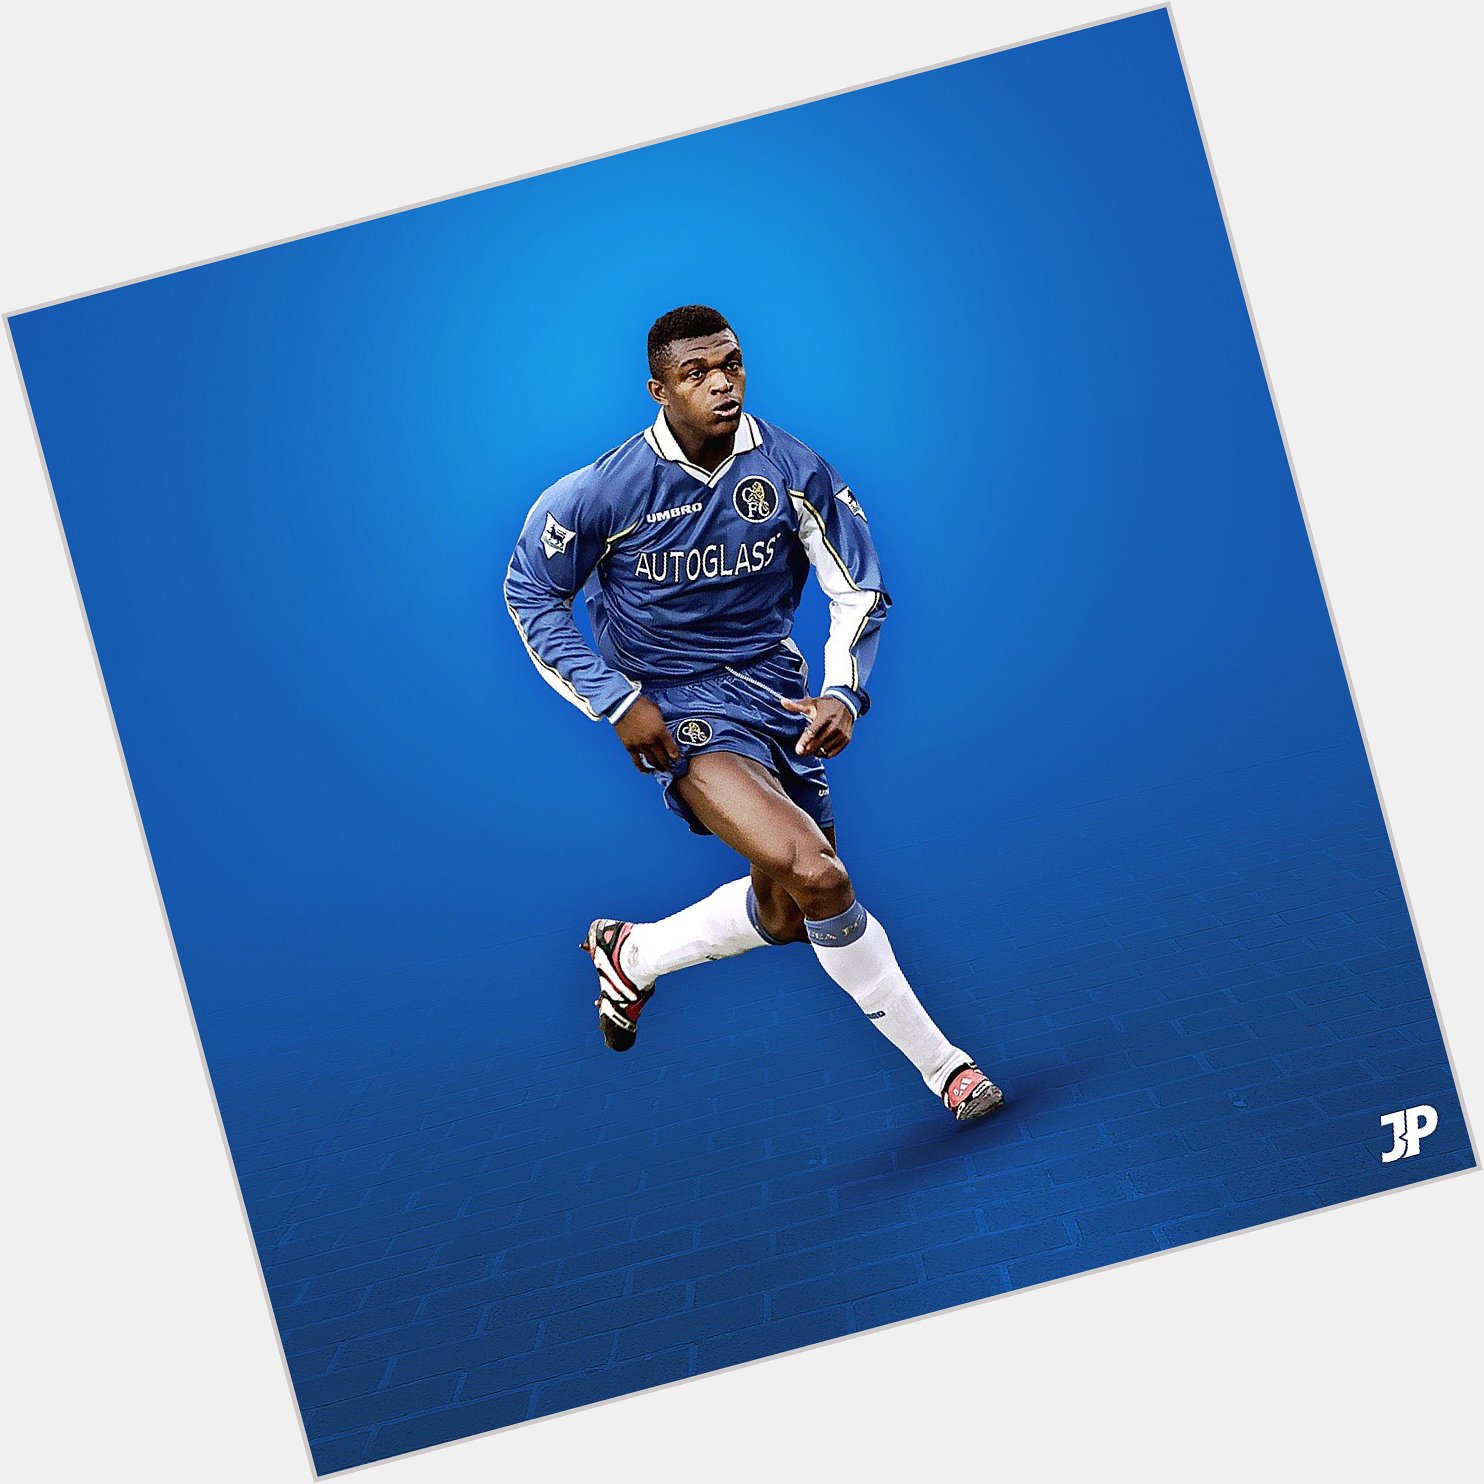 Happy Birthday to Marcel Desailly, one of my favourite Chelsea players growing up.  